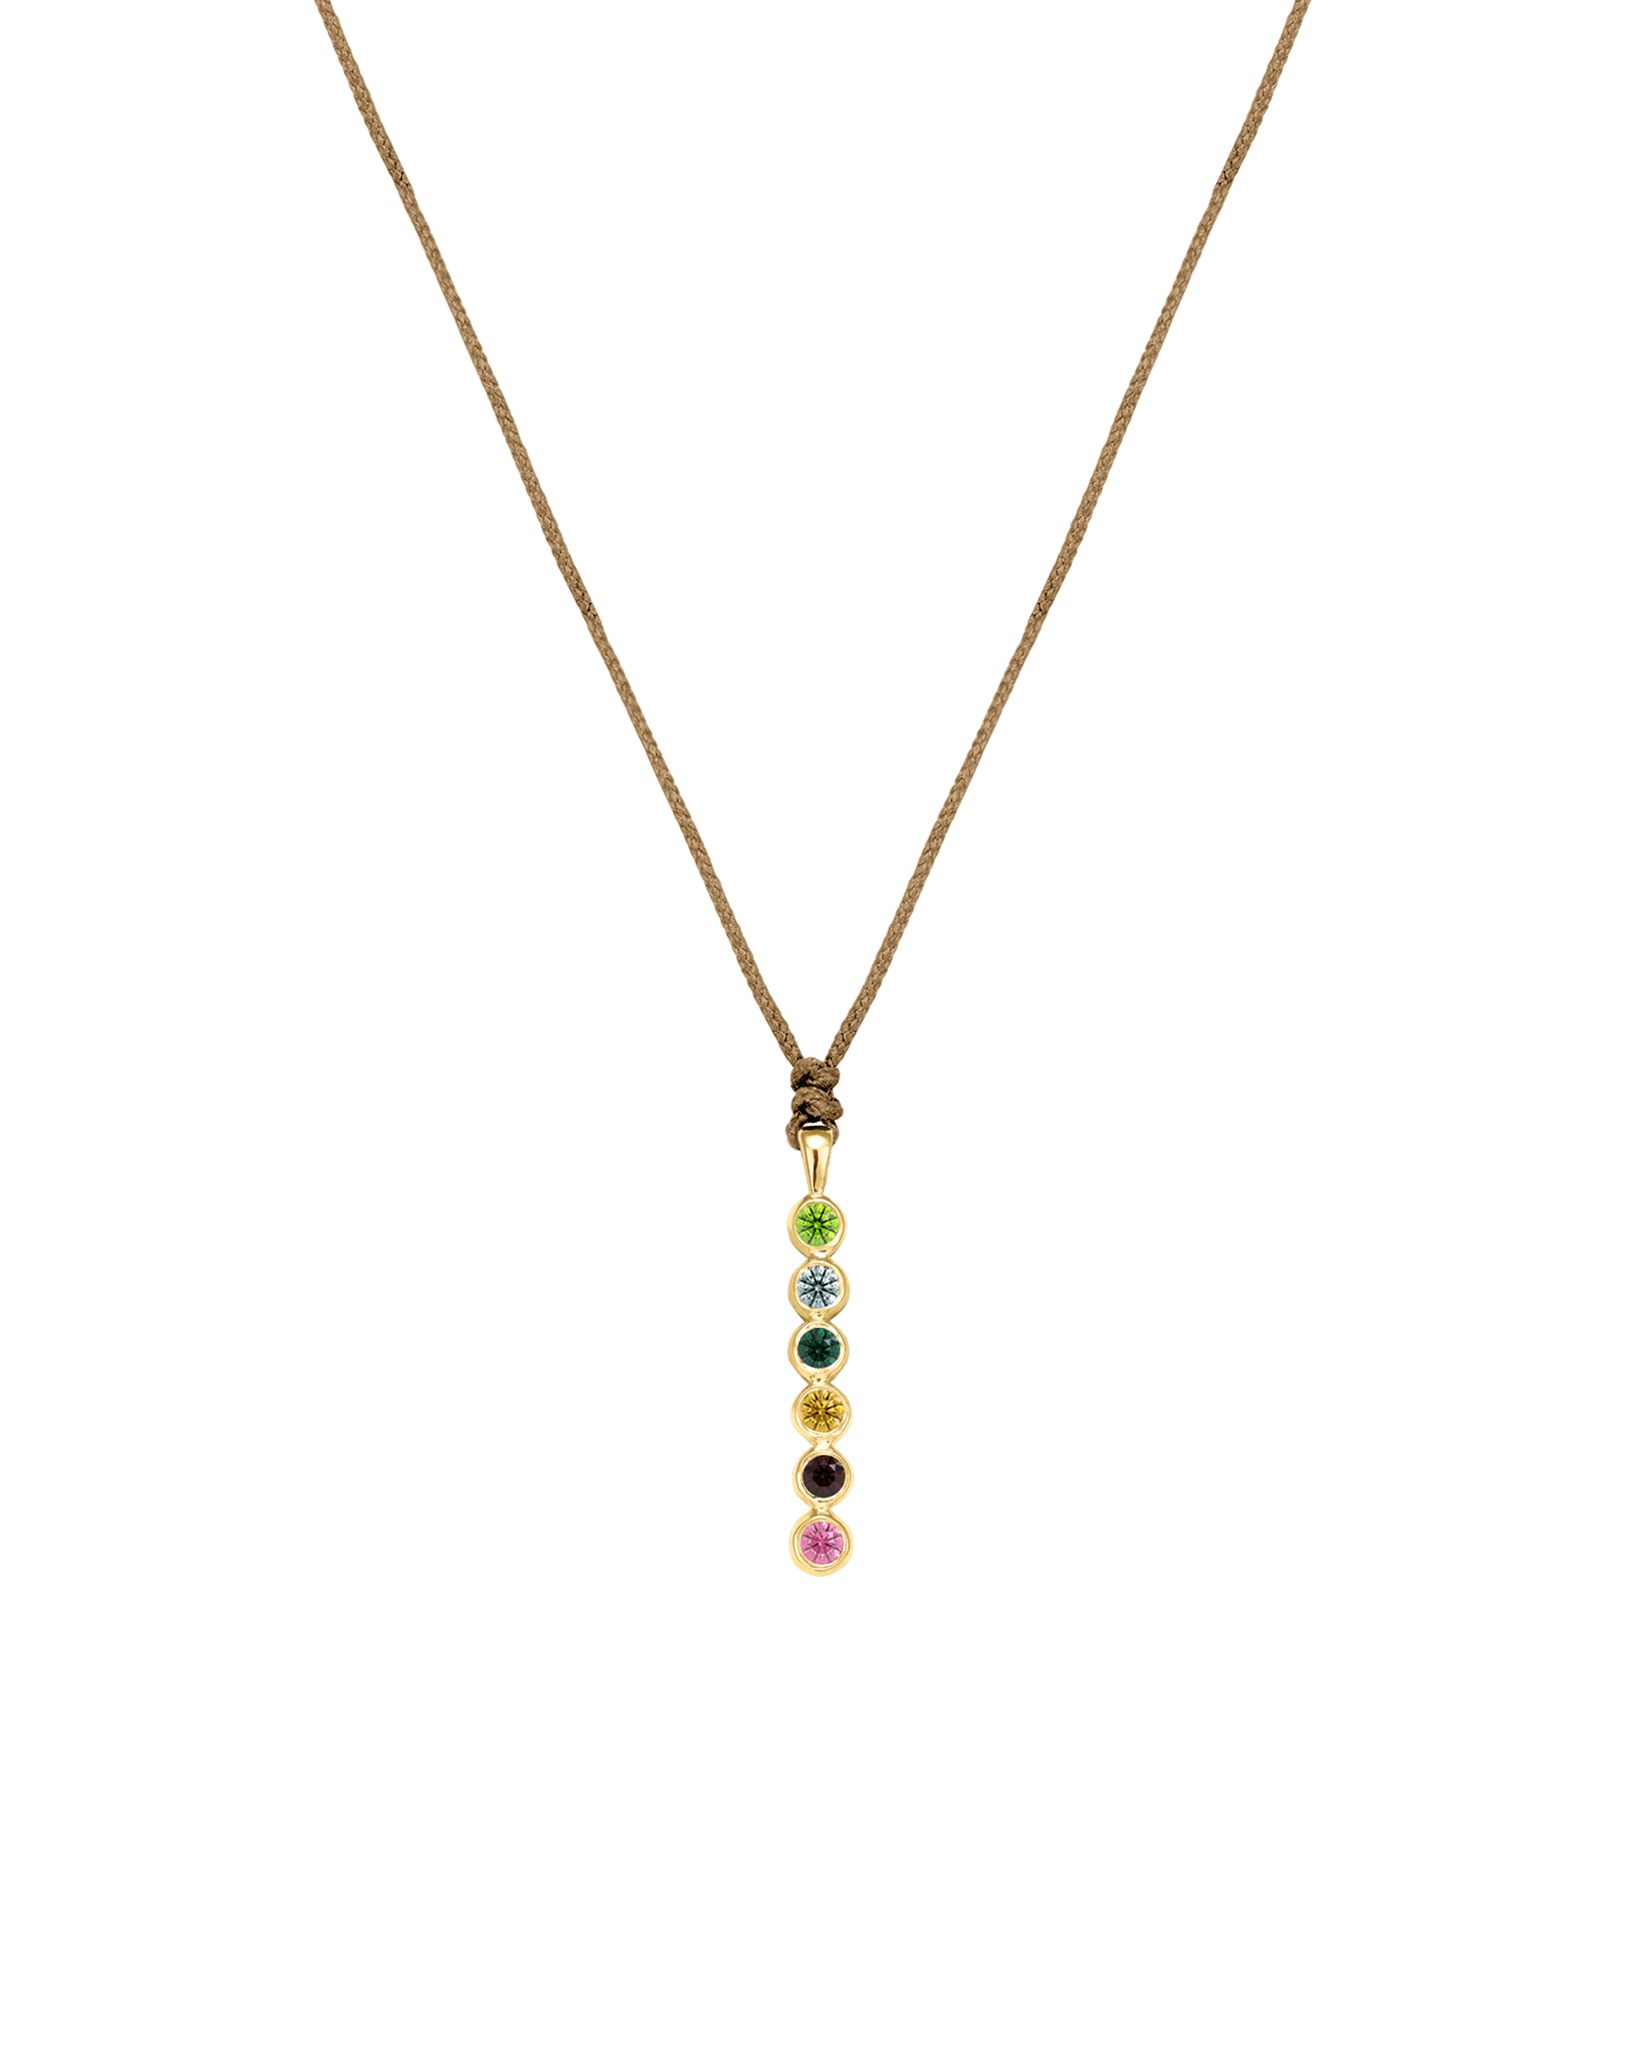 The Birthstones Bar Necklace - 14K Yellow Gold Necklaces 14K Solid Gold Camel 2 